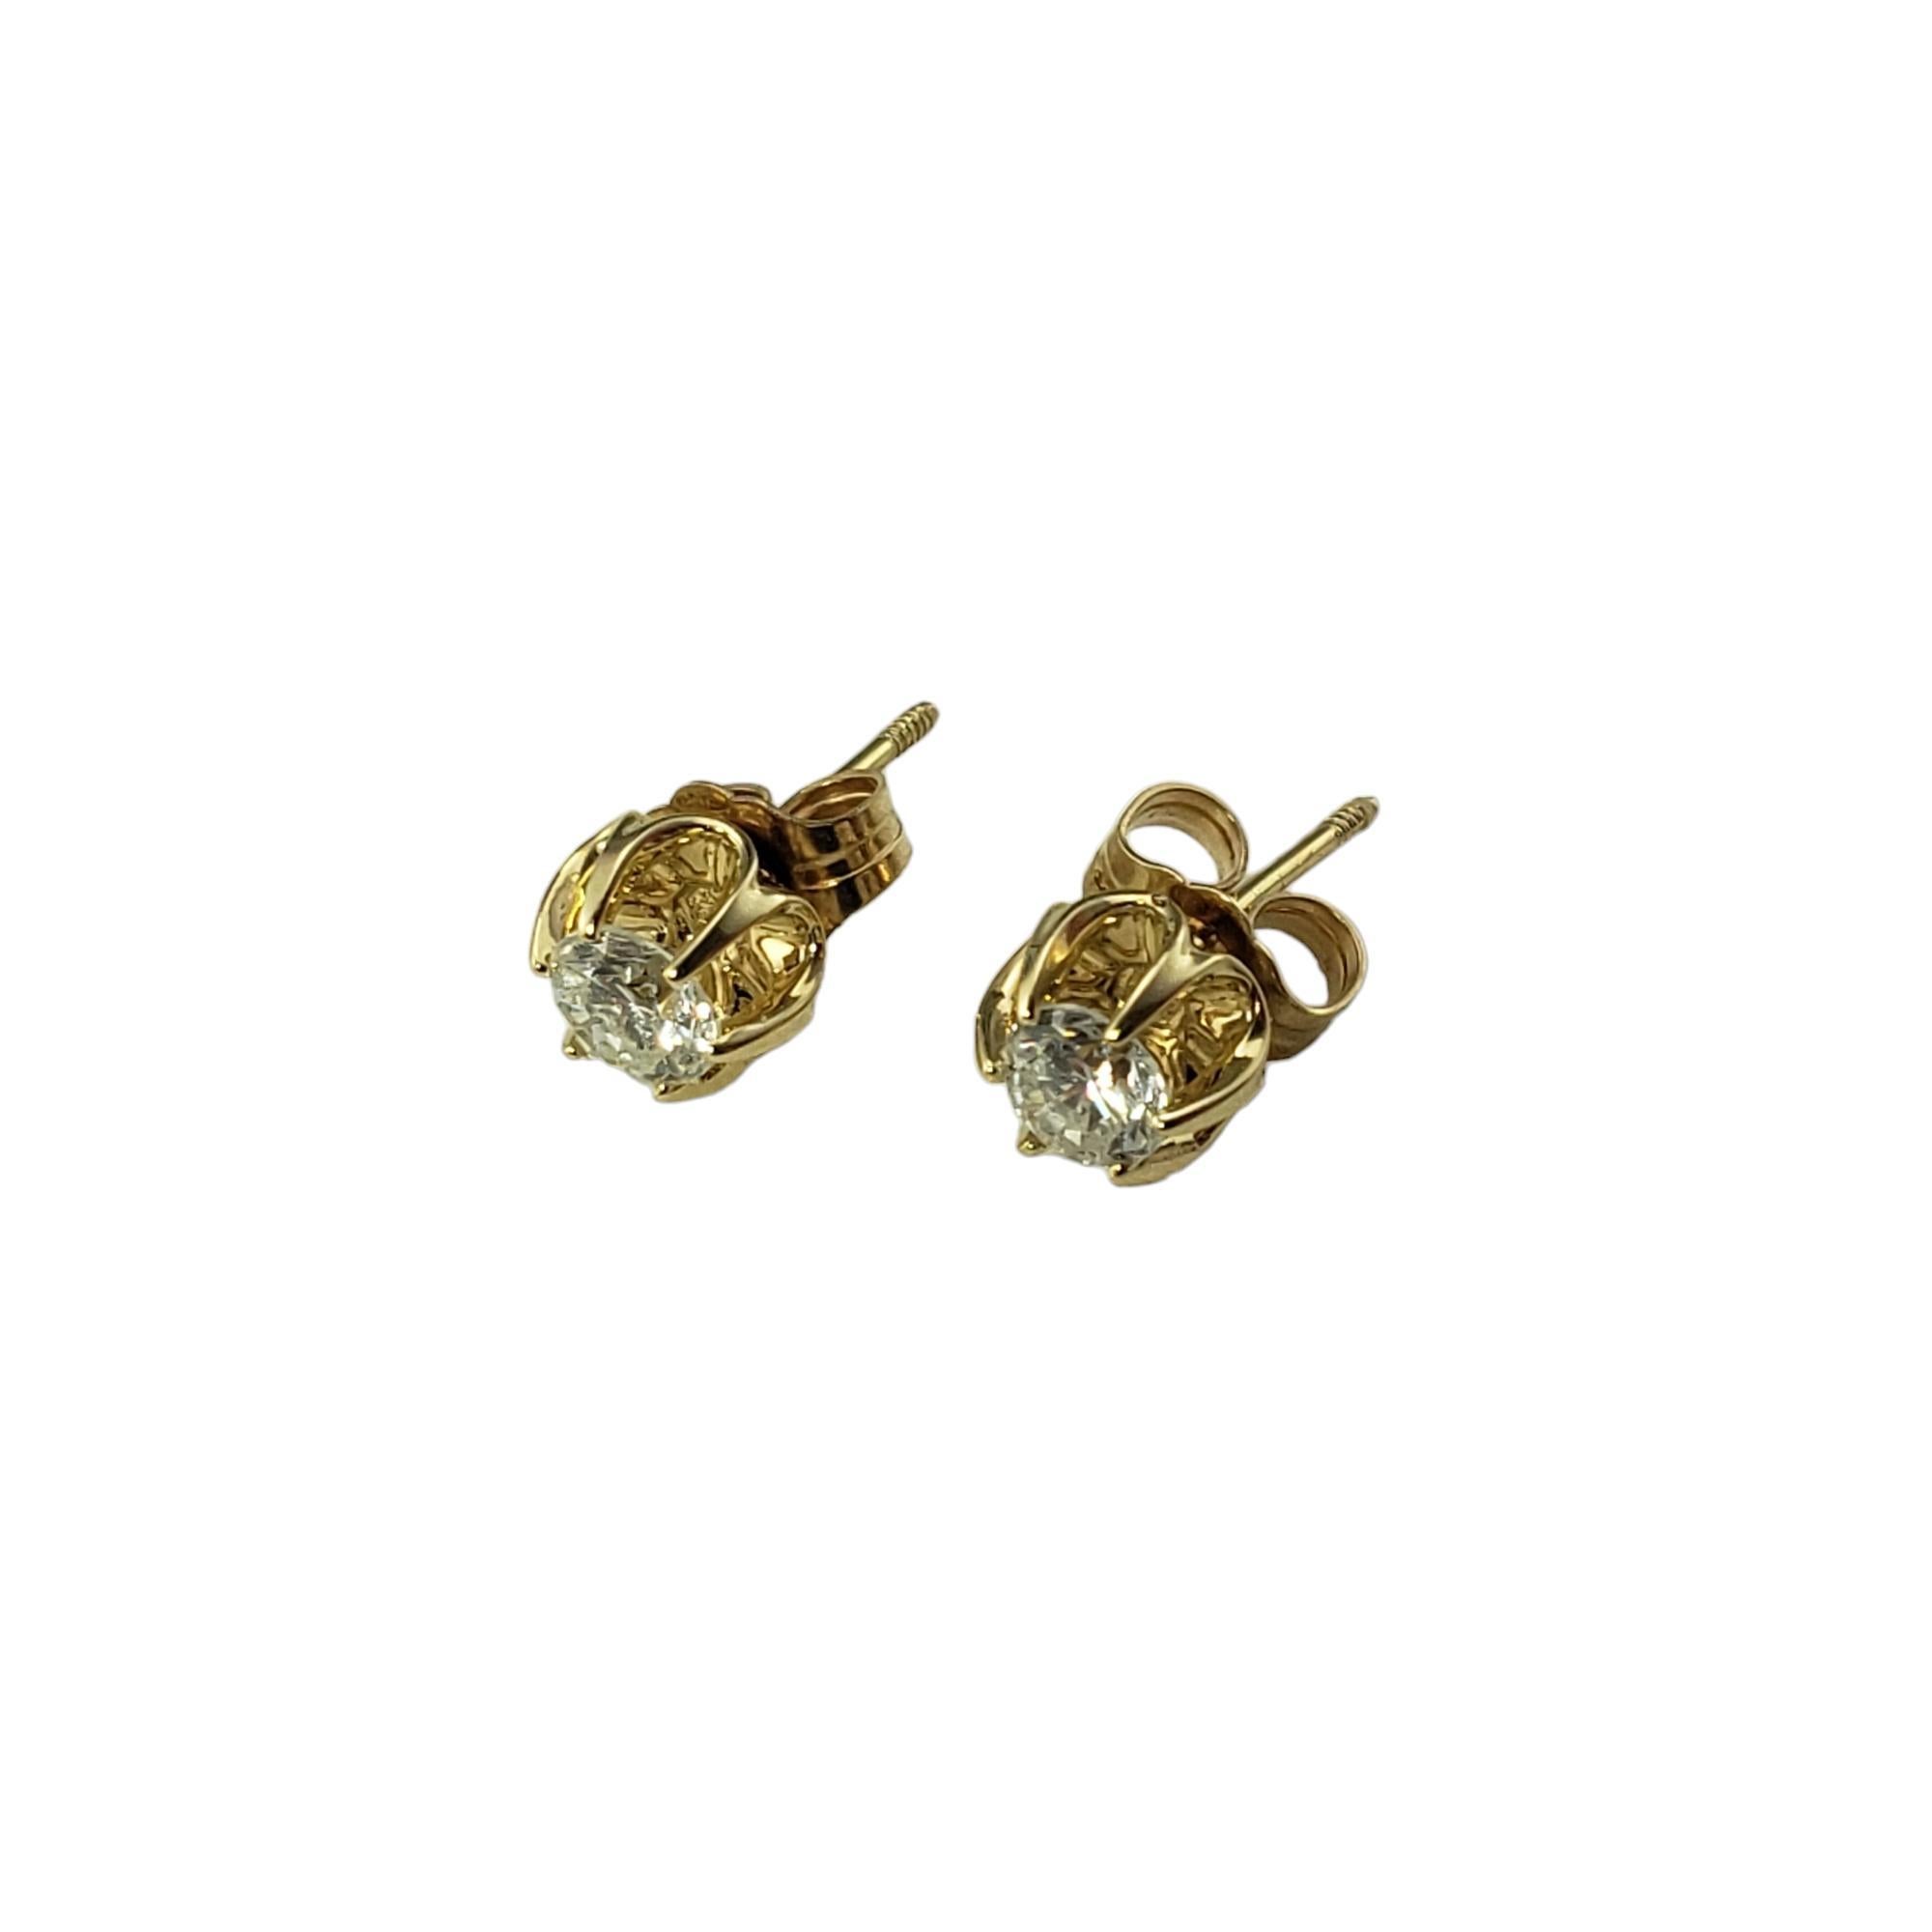 Vintage 14 Karat Yellow Gold Diamond Stud Earrings #15527 In Good Condition For Sale In Washington Depot, CT